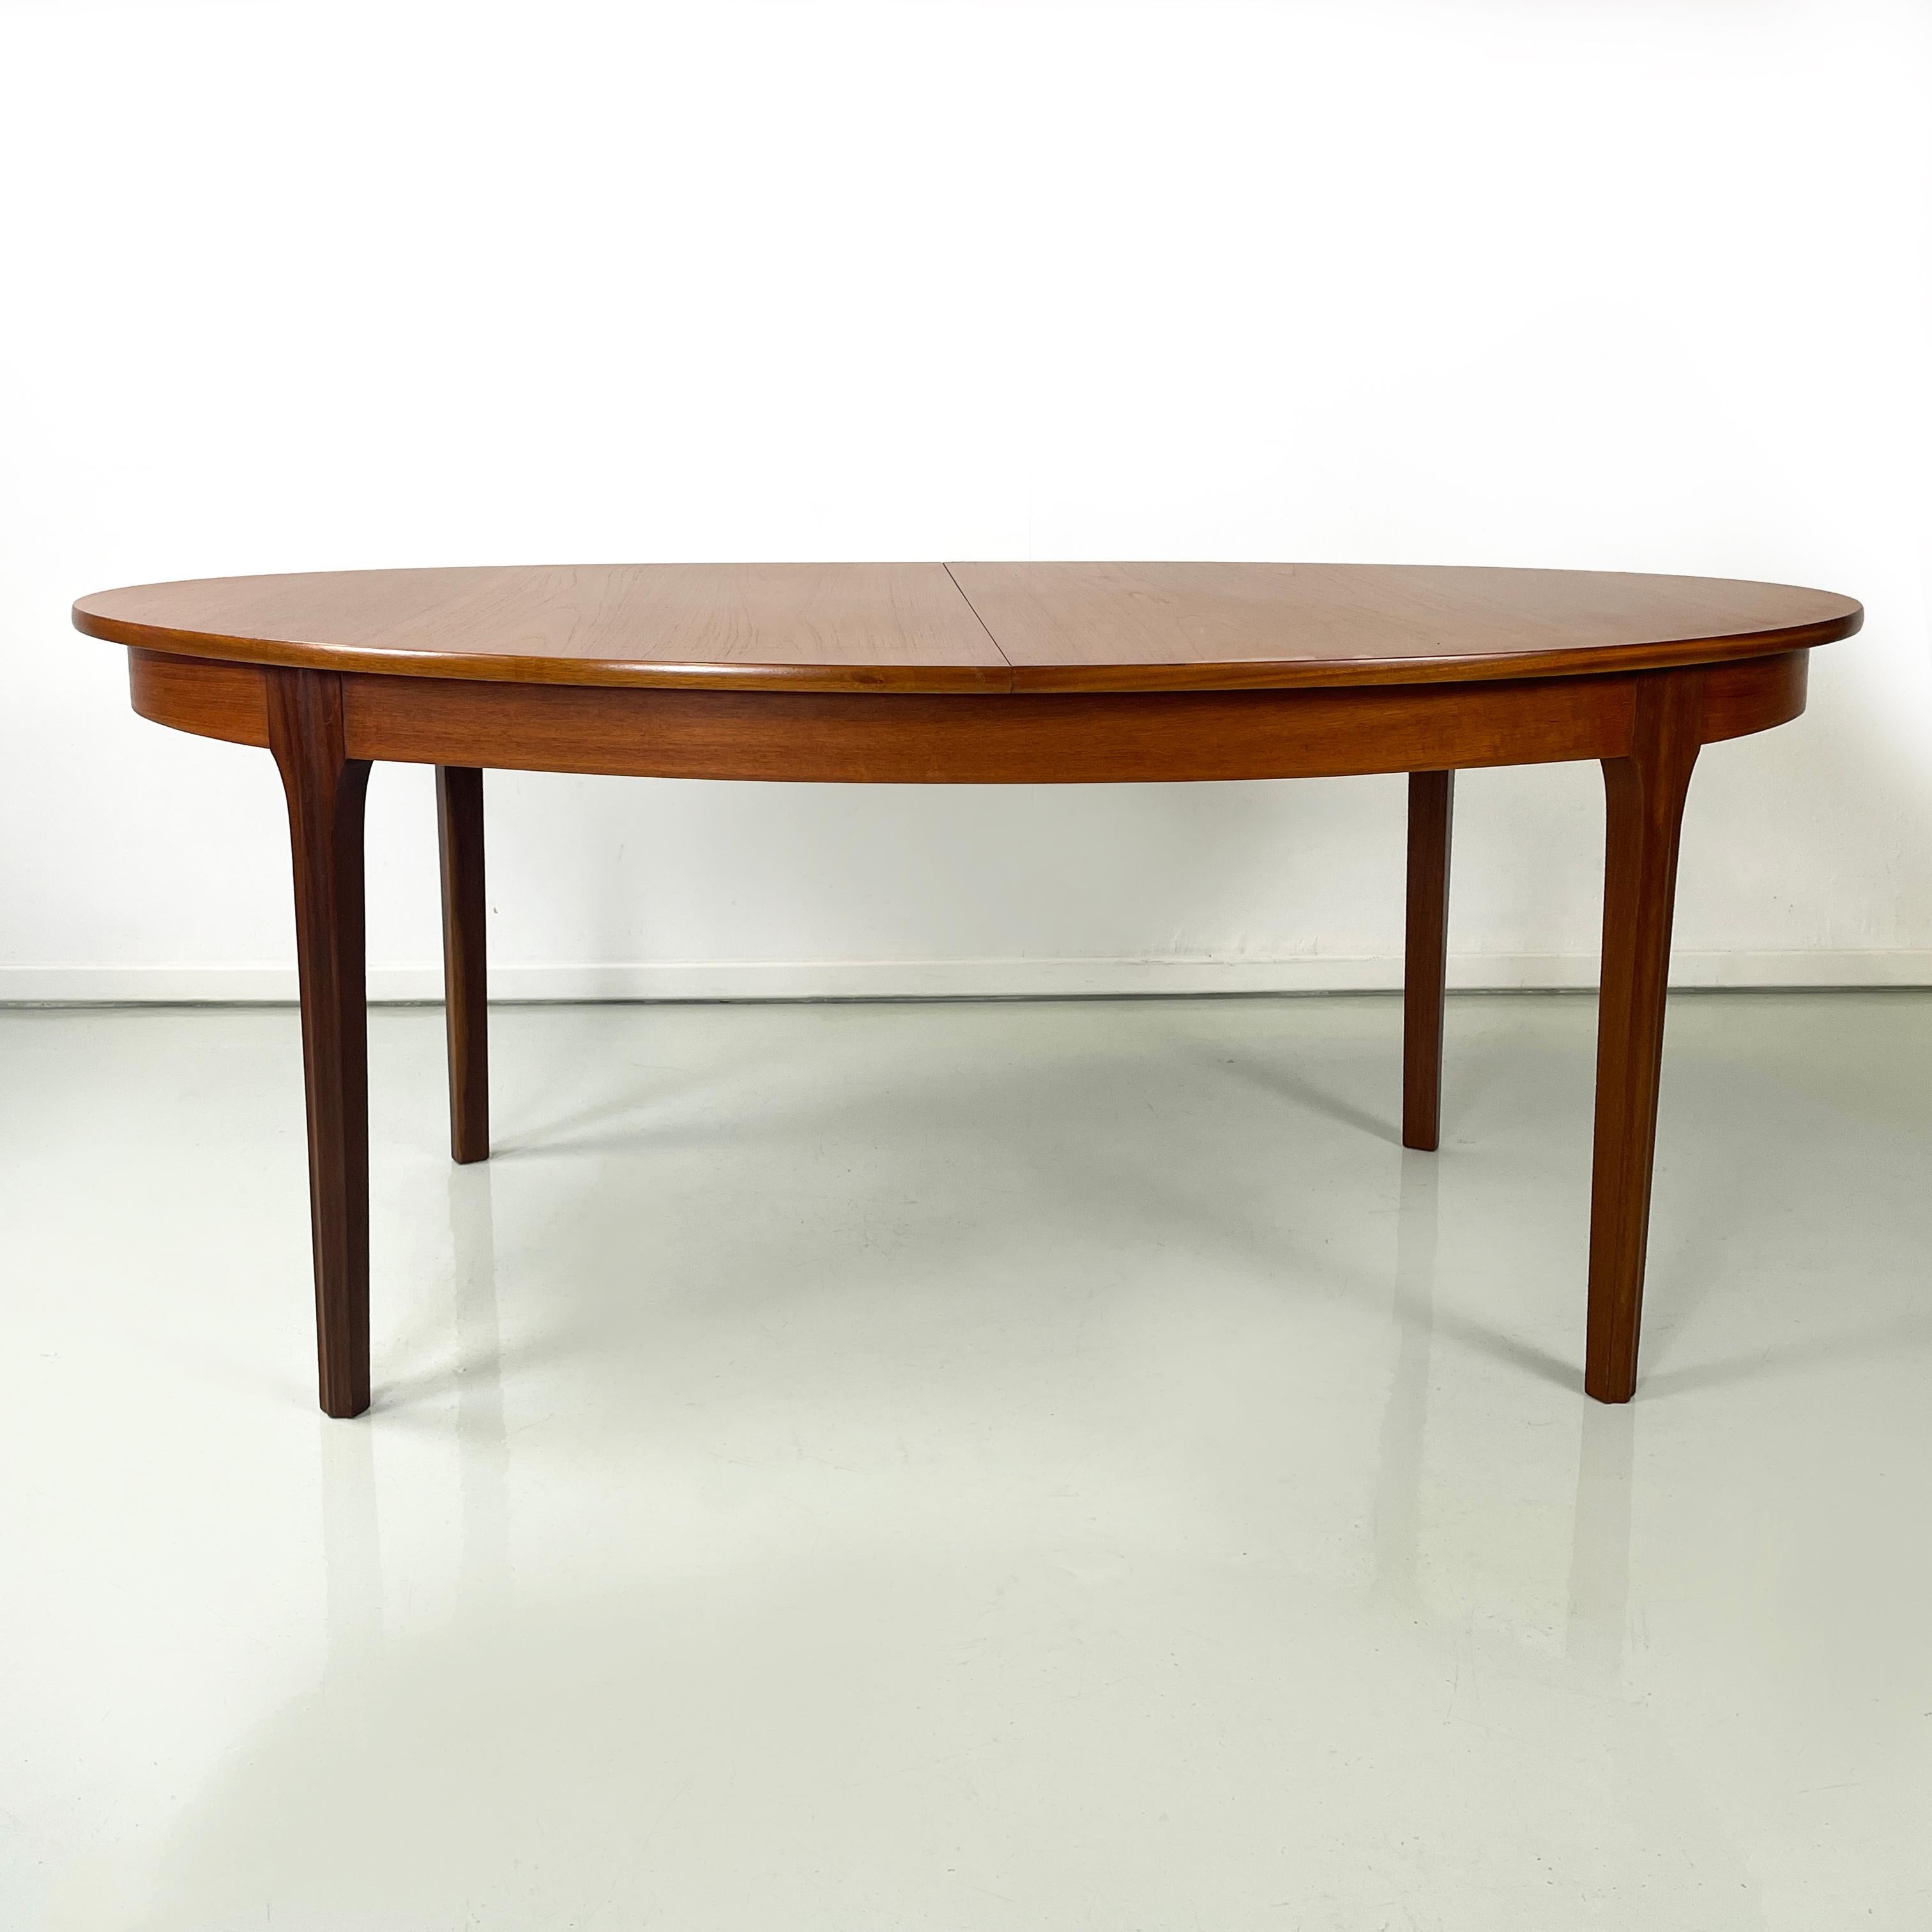 Italian mid-century modern Wooden oval dining table with extensions, 1960s
Dining table with oval, embossed and extendable top, entirely in solid wood. The two extensions are extractable in the centre.
1960 approx. S-form label present under the